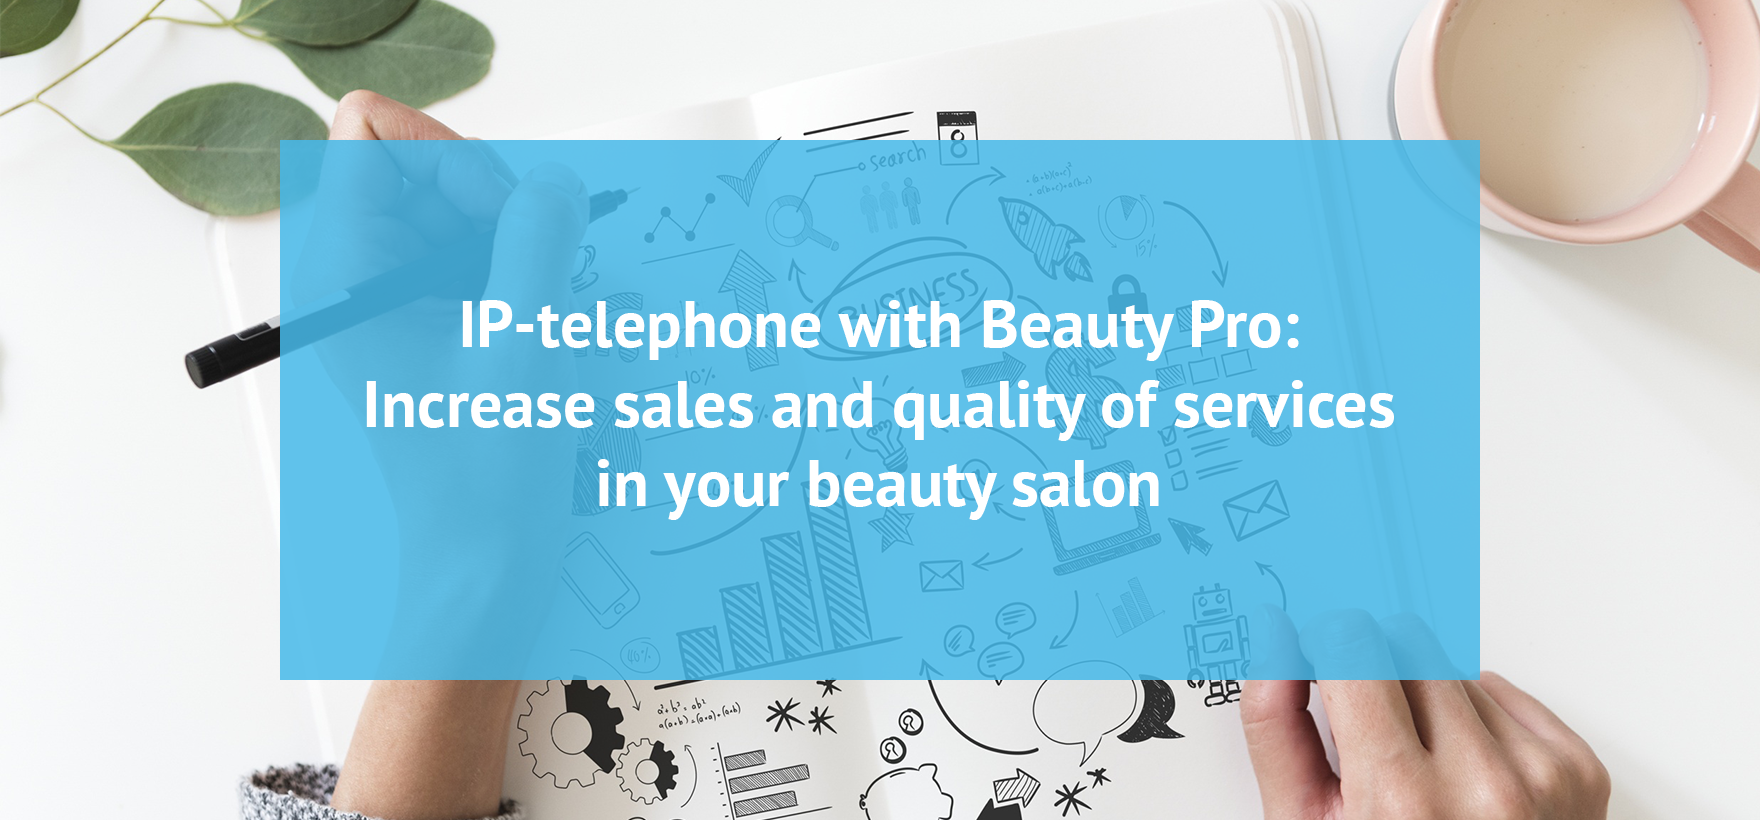 IP-Telephony with Beauty Pro: Increase Sales and Quality of Services in Your Beauty Salon